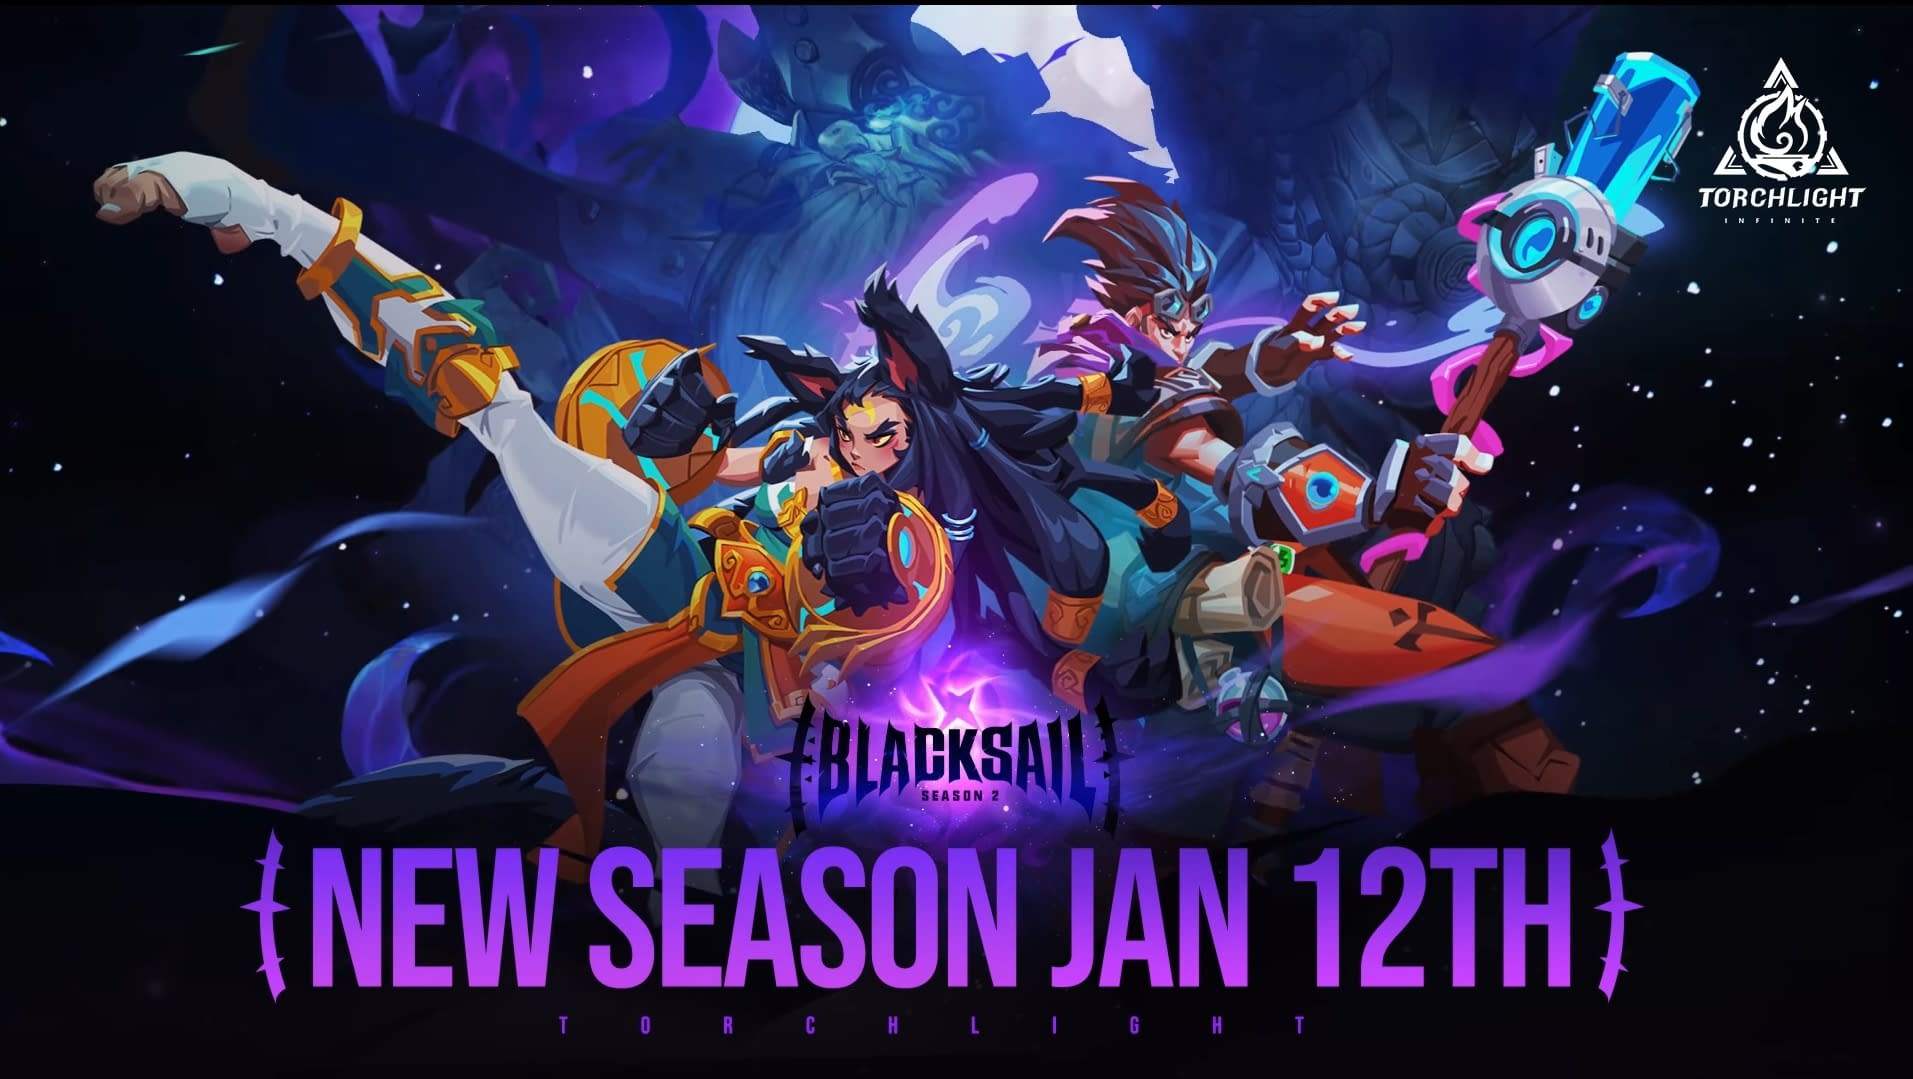 Torchlight: Infinite Season 2 is Coming in January, With New Story, Skills,  and Endgame Content